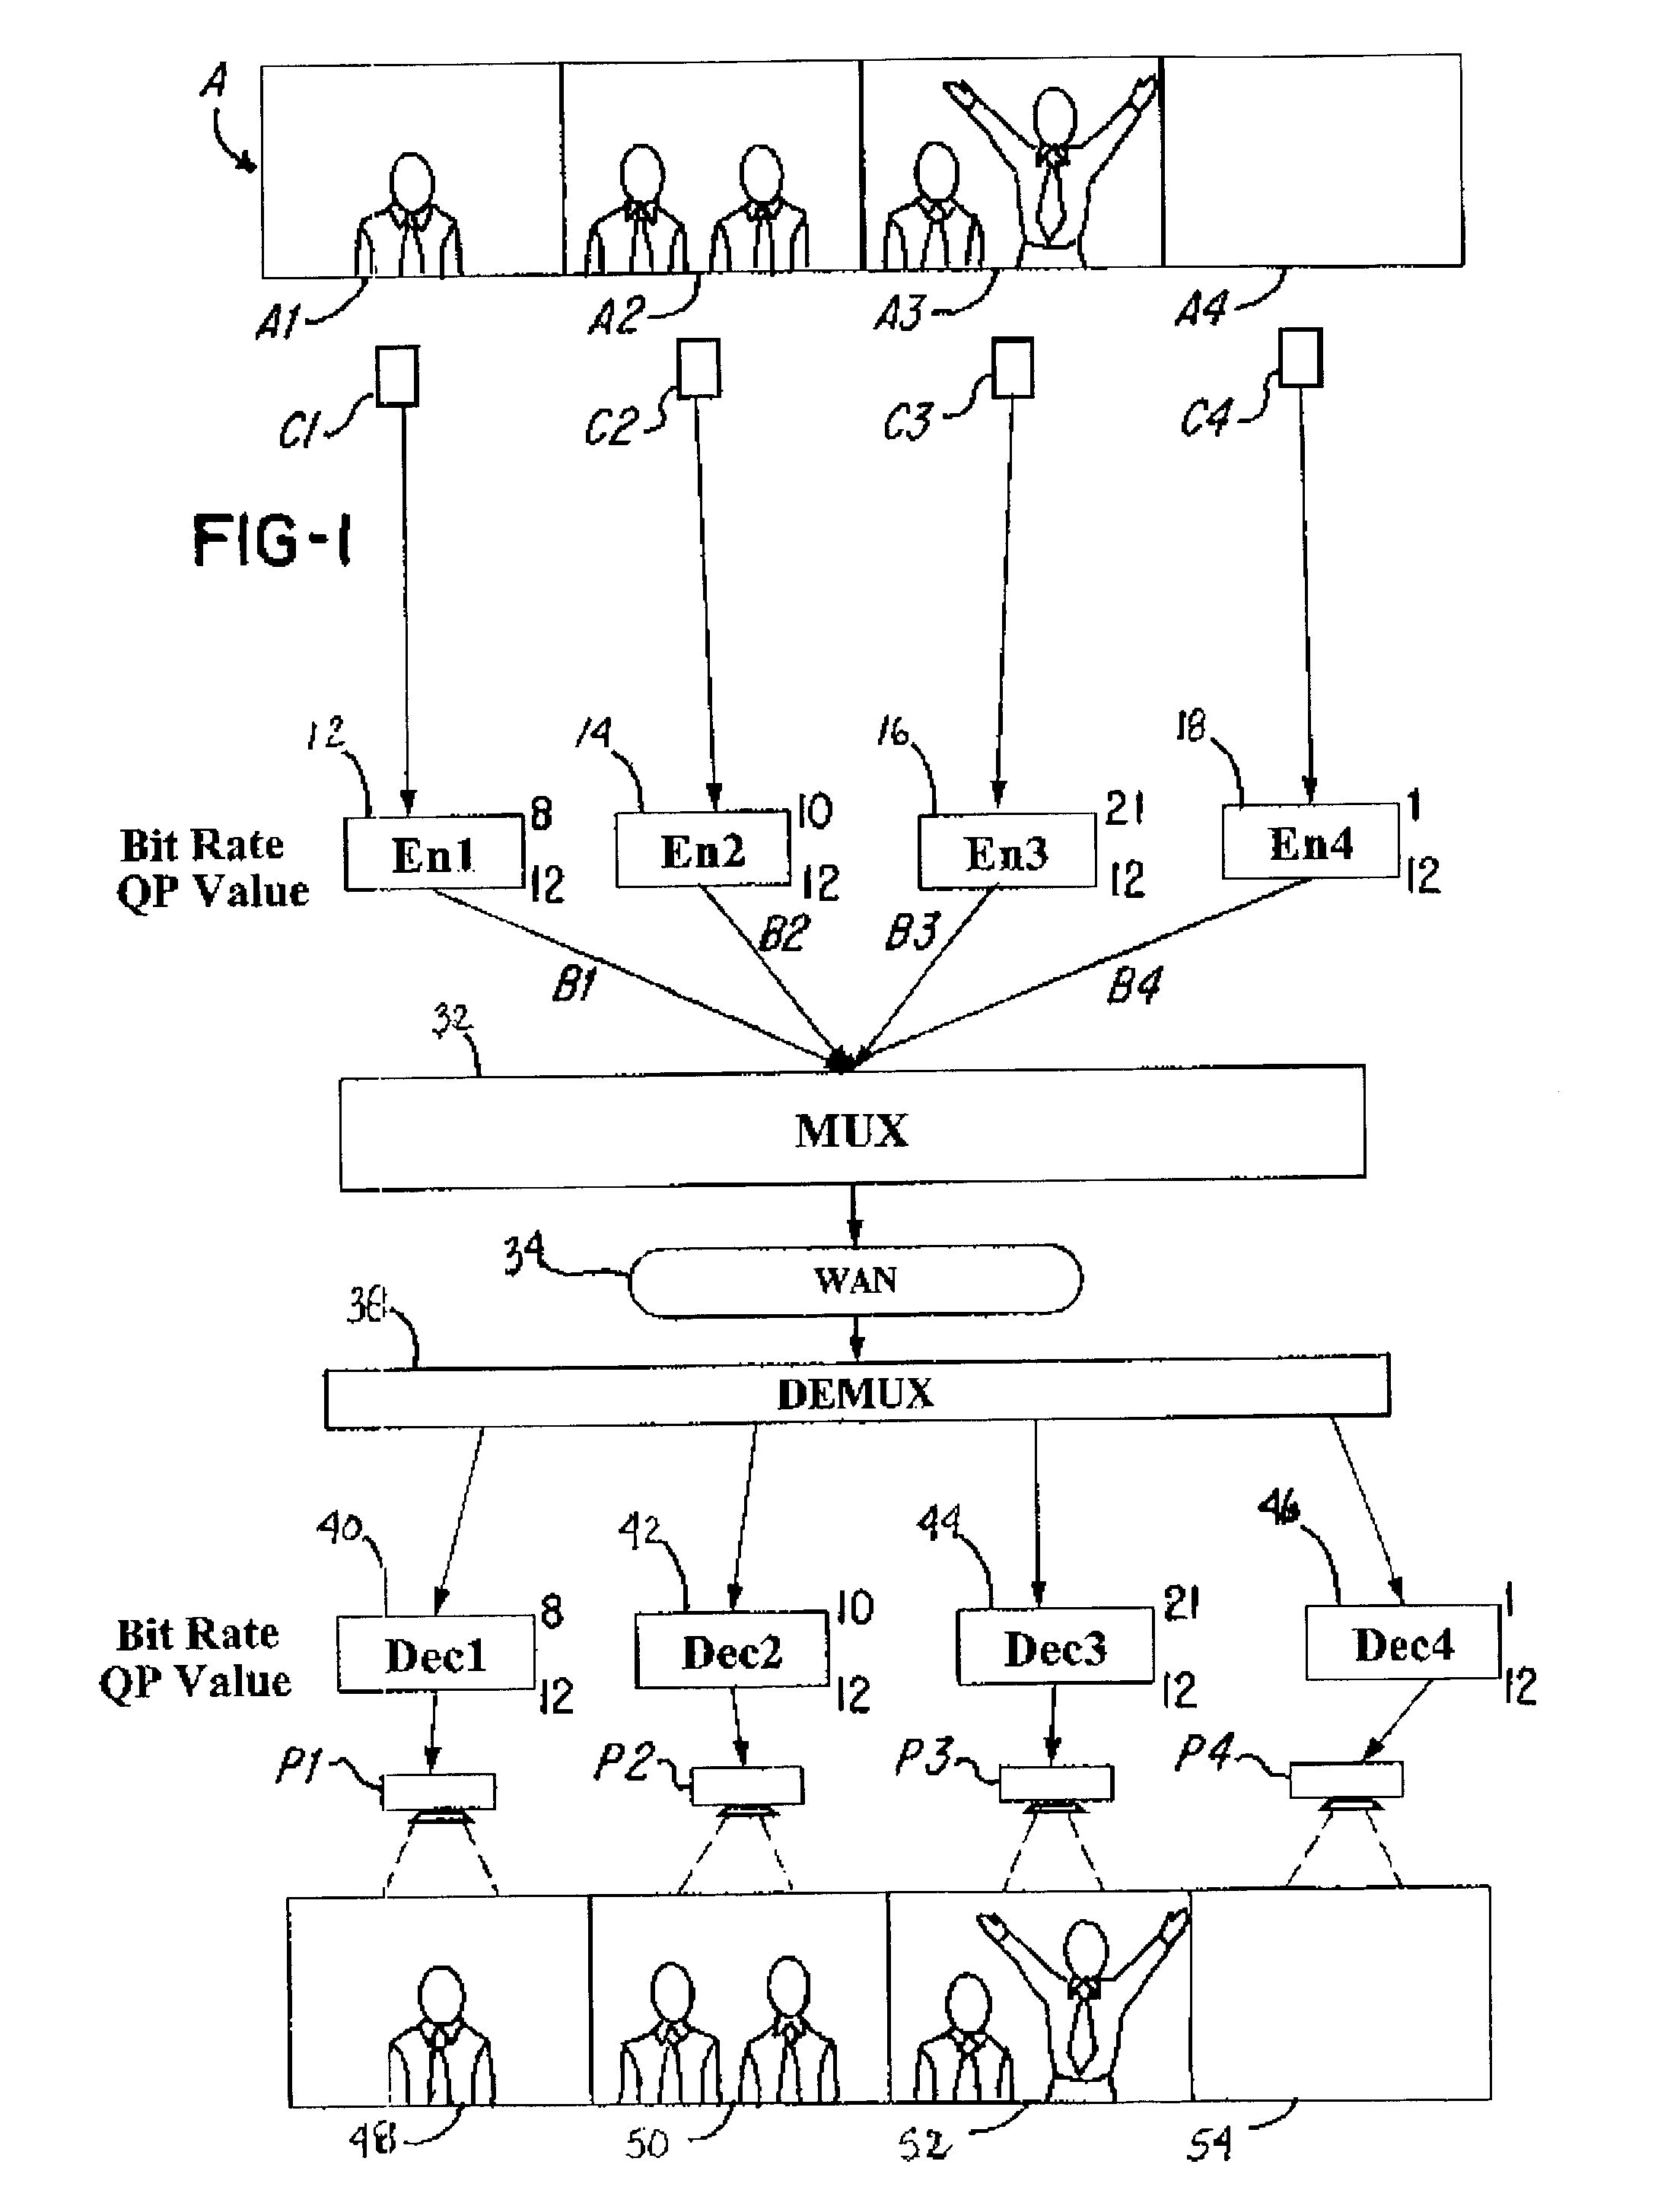 System and method for optimal transmission of a multitude of video pictures to one or more destinations